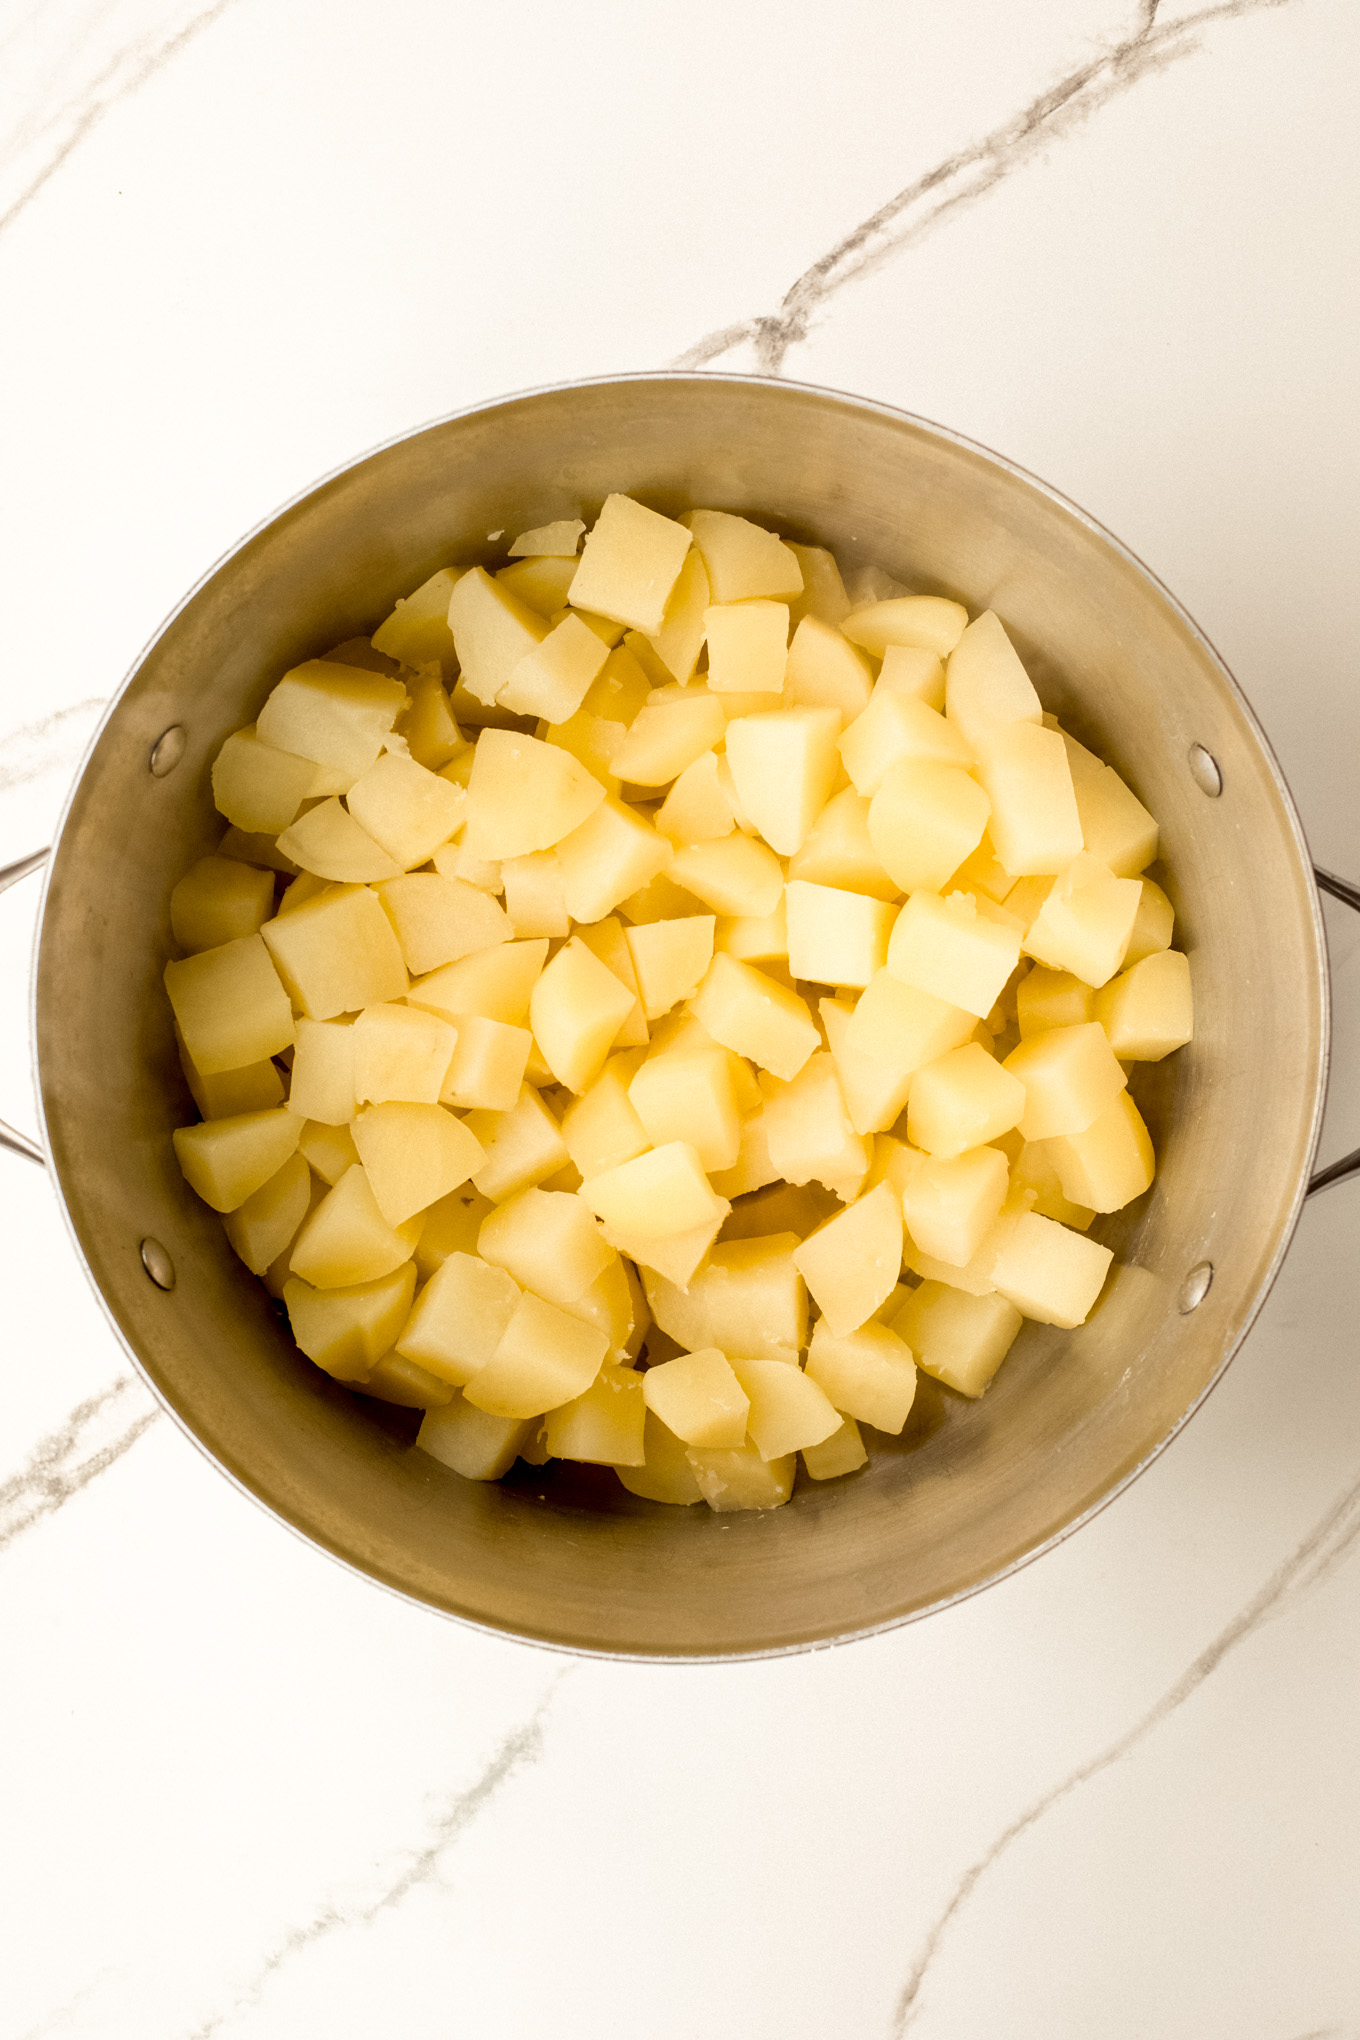 cooked and drained potatoes in a stockpot.